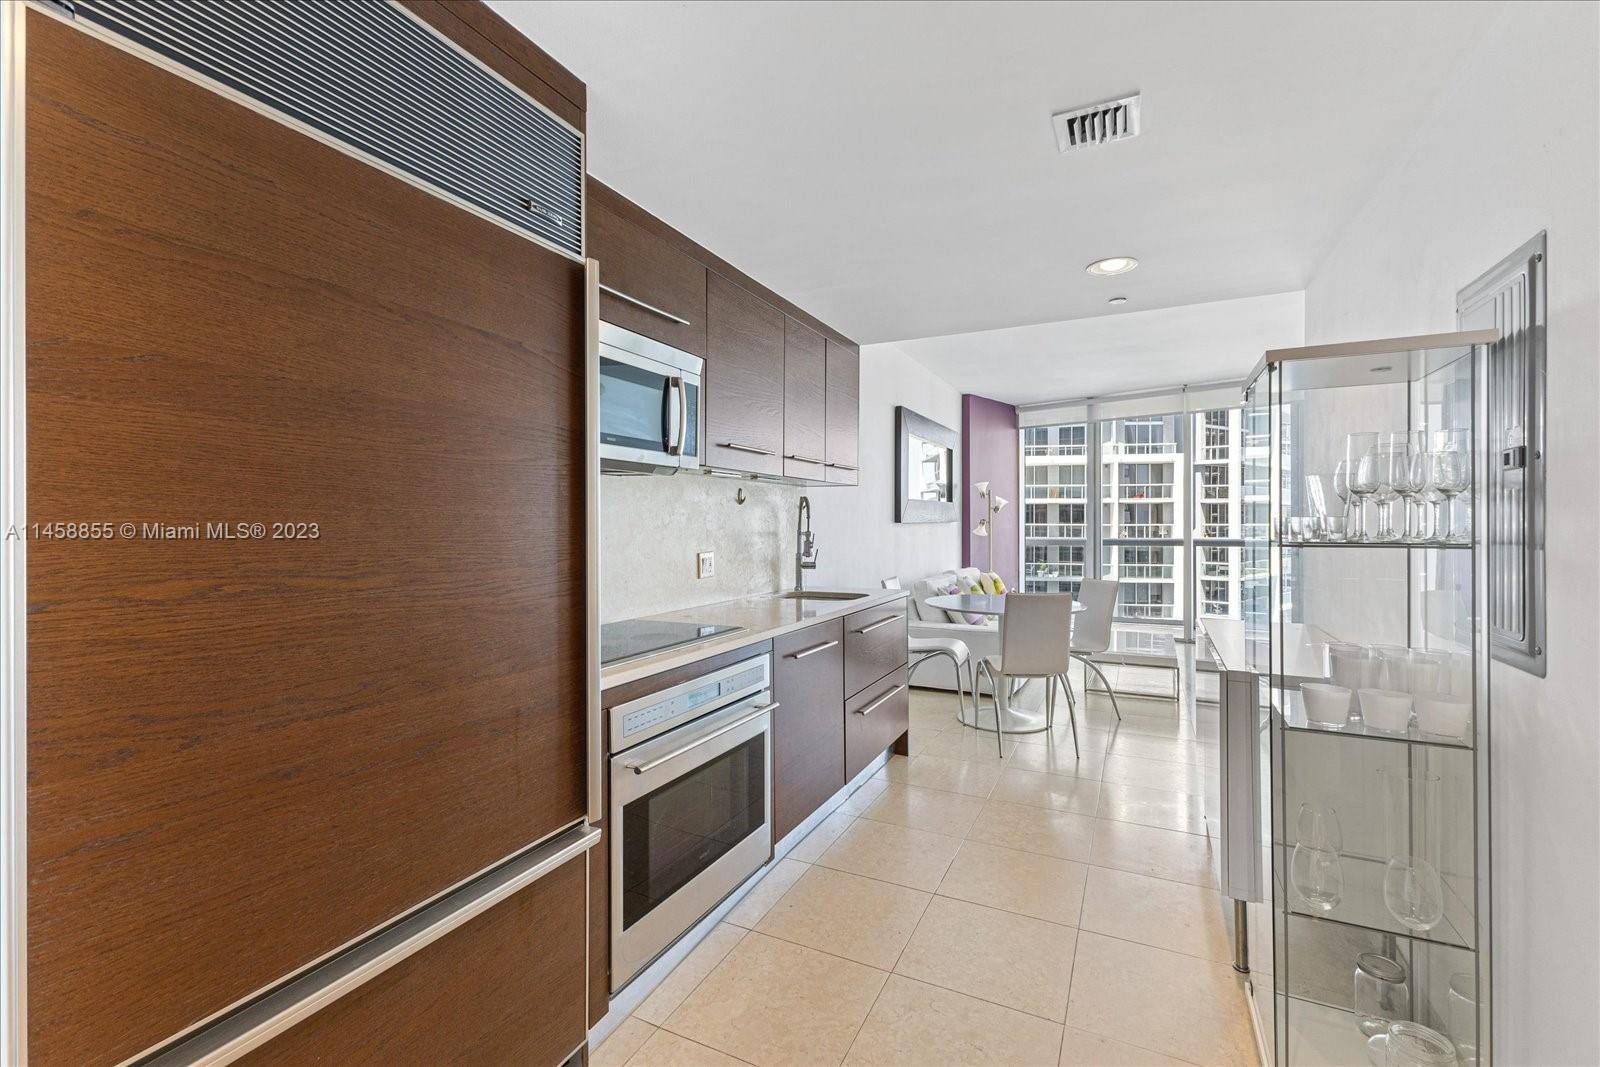 One of the Best View from this Cute Icon Brickell One bedroom, One Full Bath Condo.